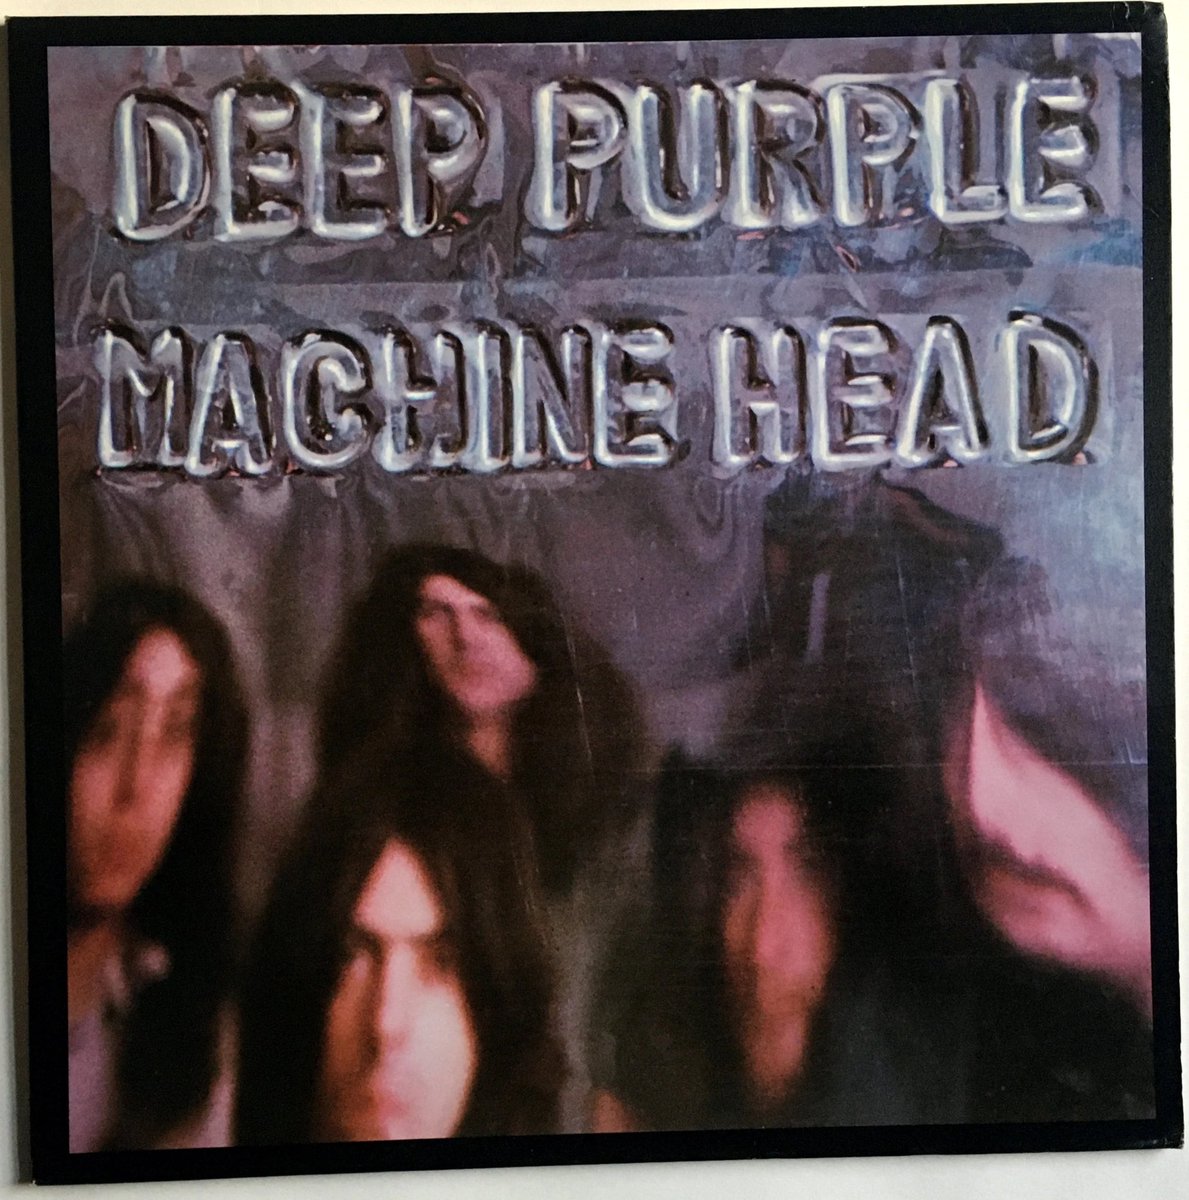 On this day in 1972, Deep Purple release Machine Head.